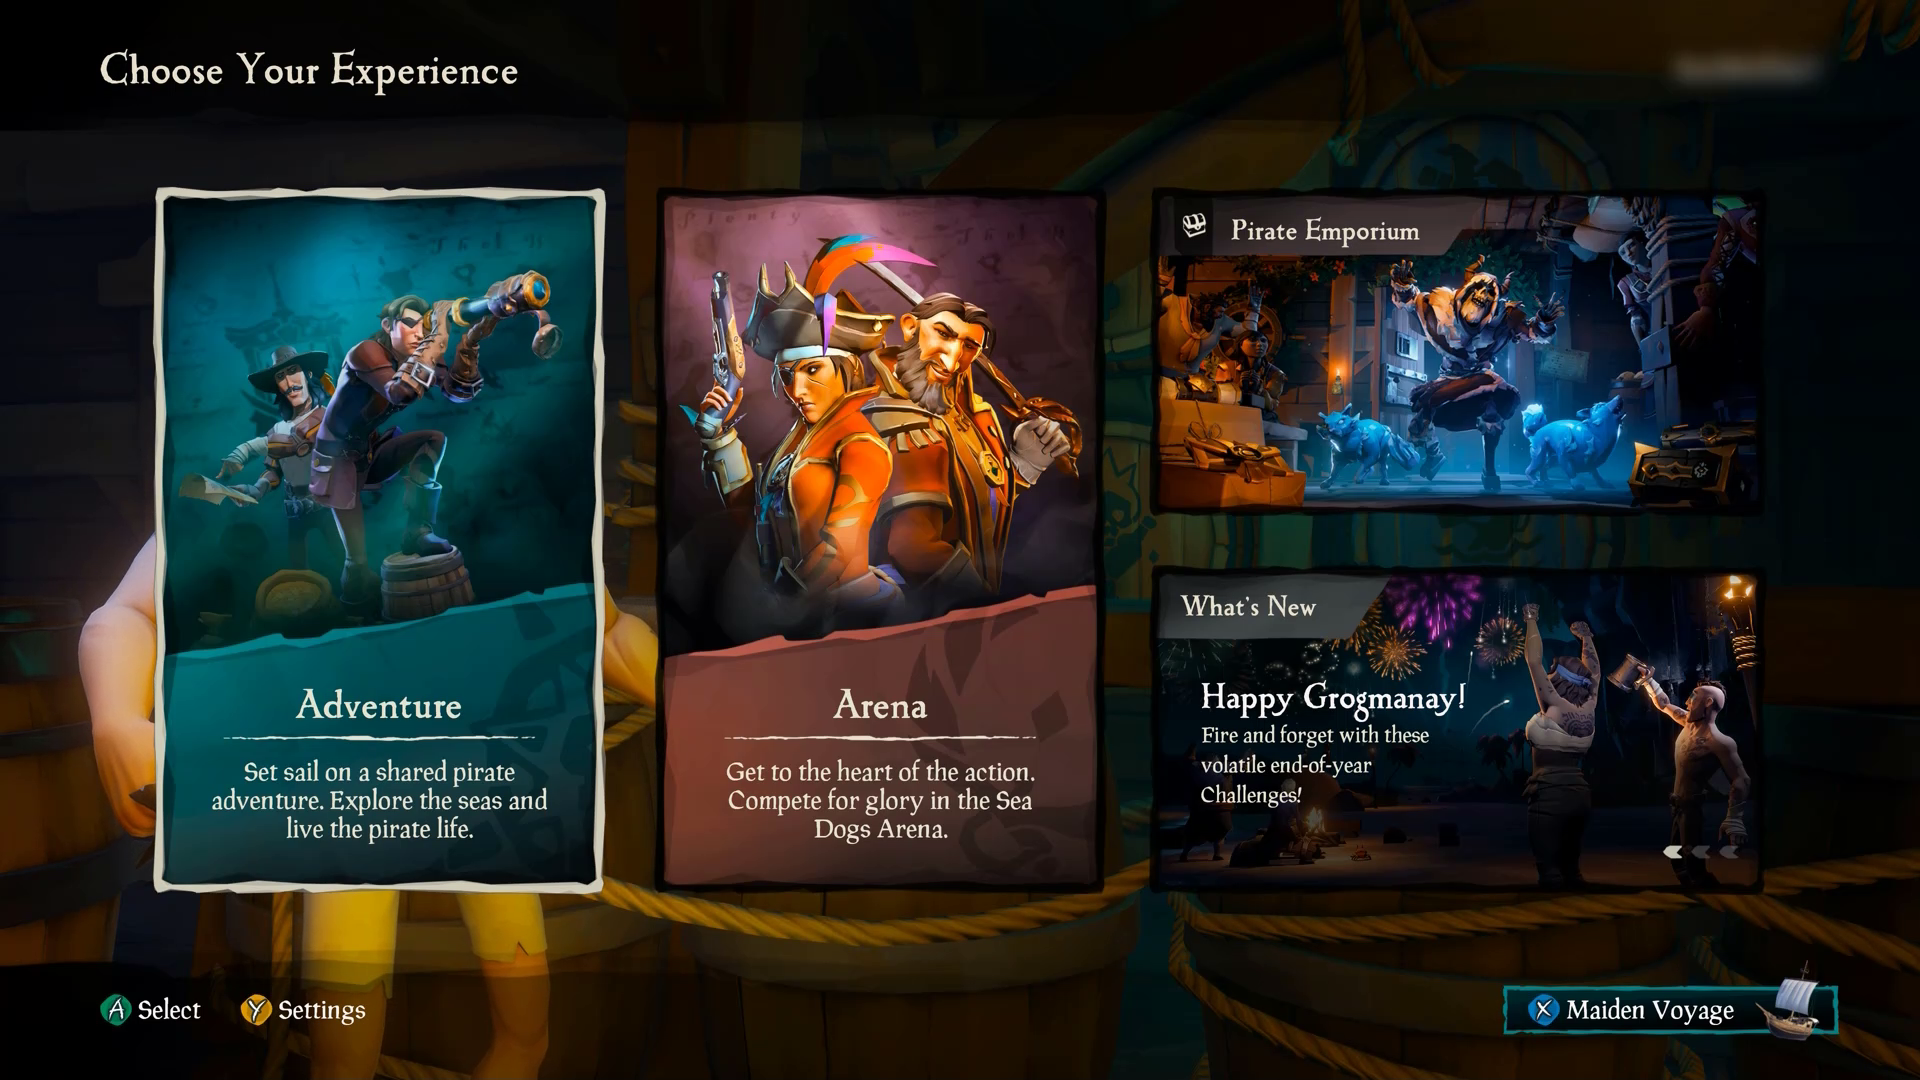 A screenshot from Sea of Thieves that shows the "Choose Your Experience" screen. The "Adventure" tile is selected.